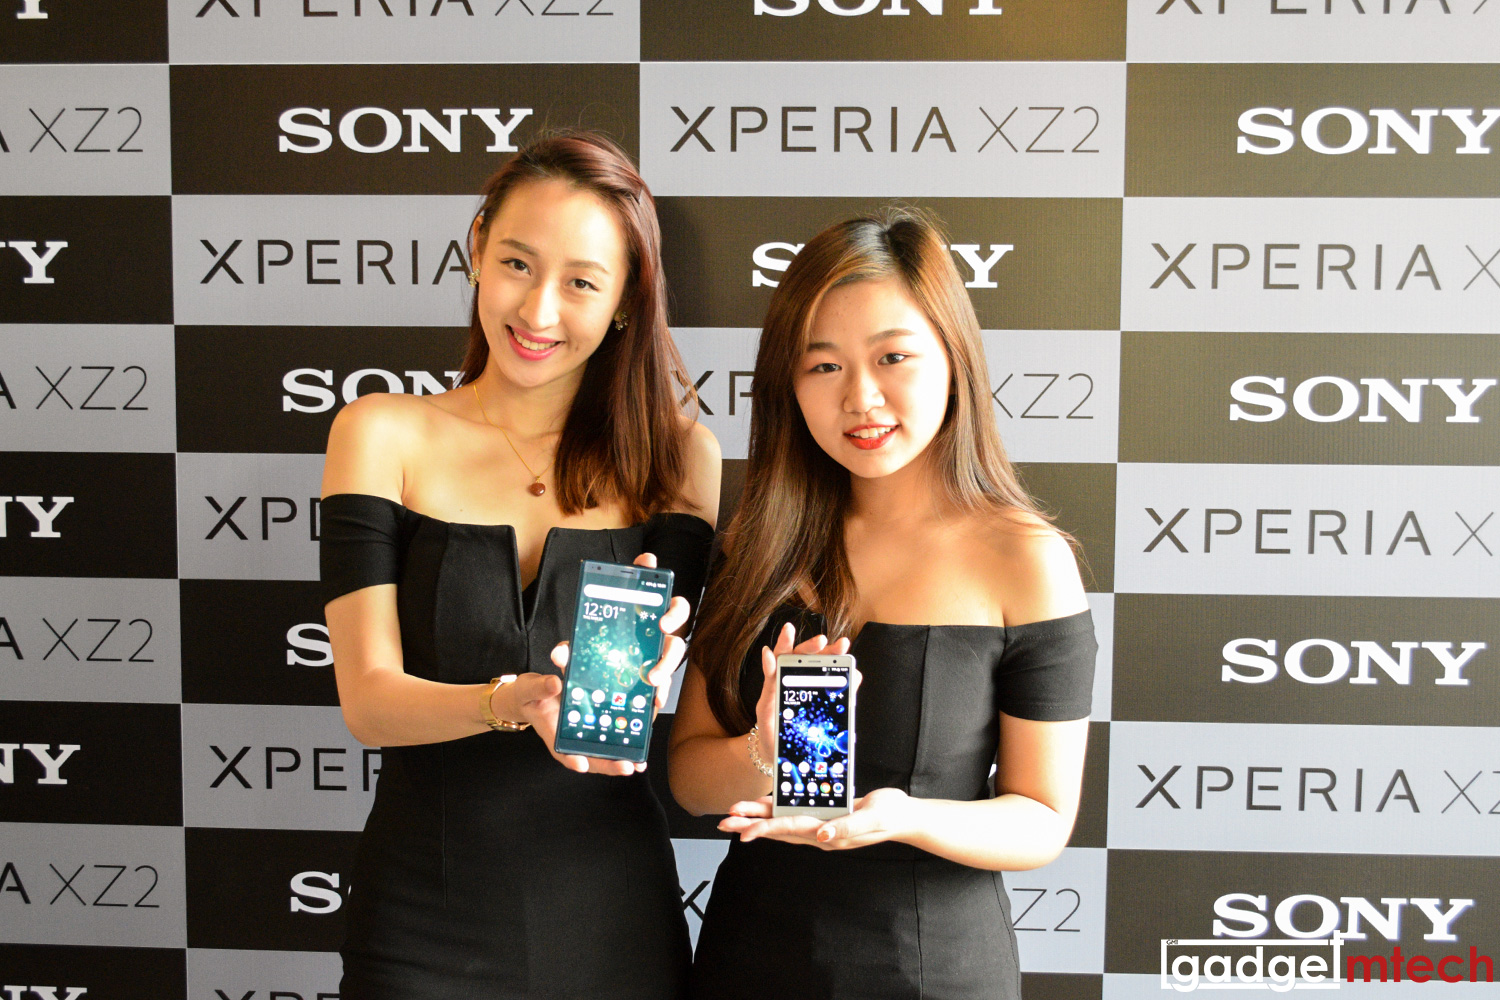 Sony Xperia XZ2 and XZ2 Compact Launch